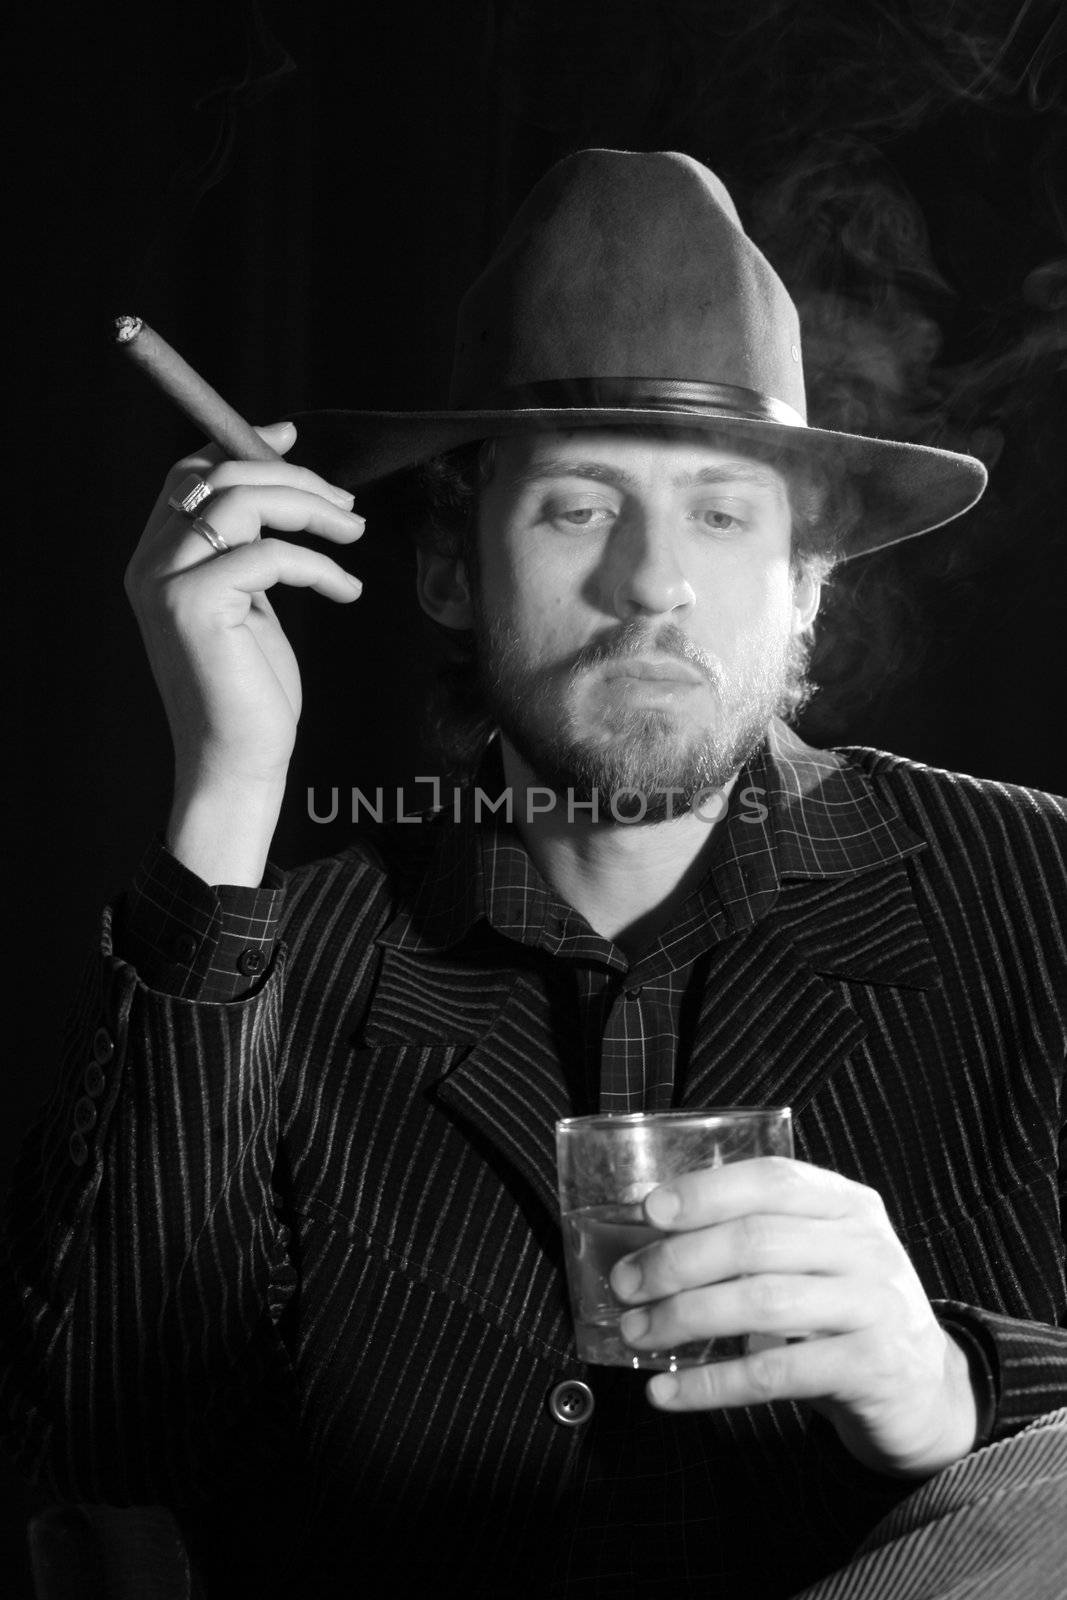 An image of a bearded man with cigar and glass